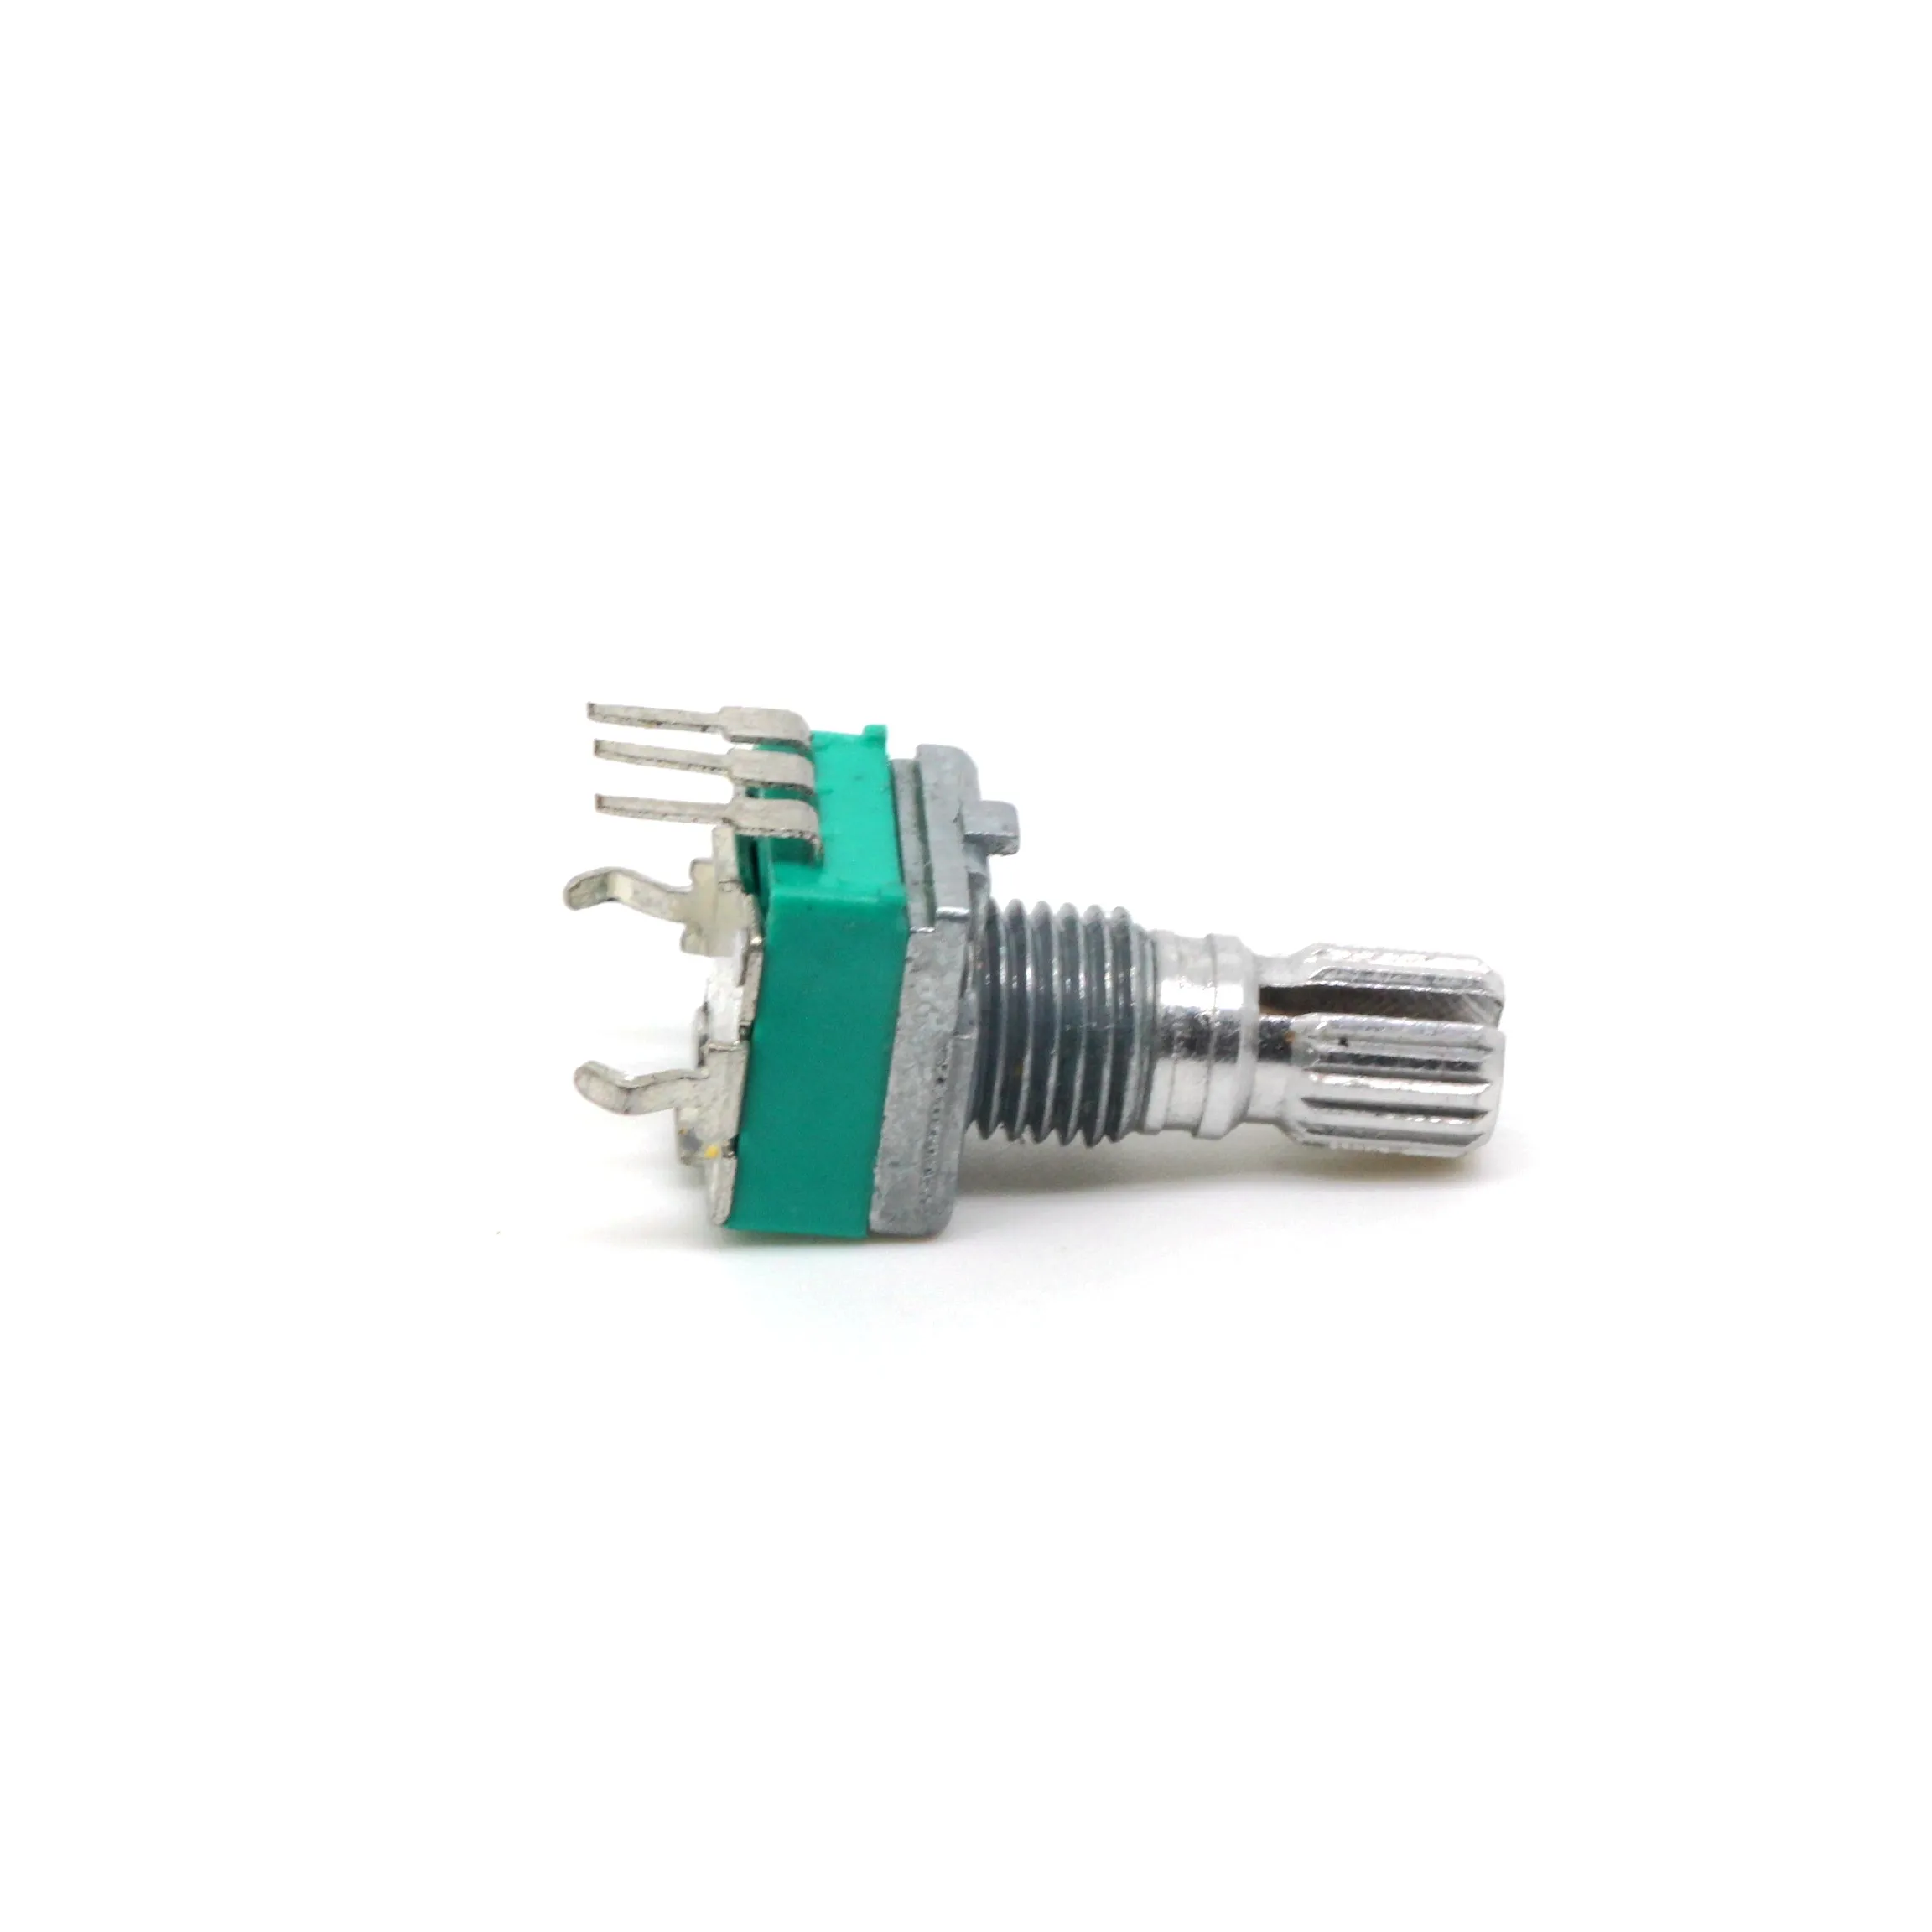 9MM vertical bent foot metal shaft tuning and dimming speed adjustment rotating potentiometer